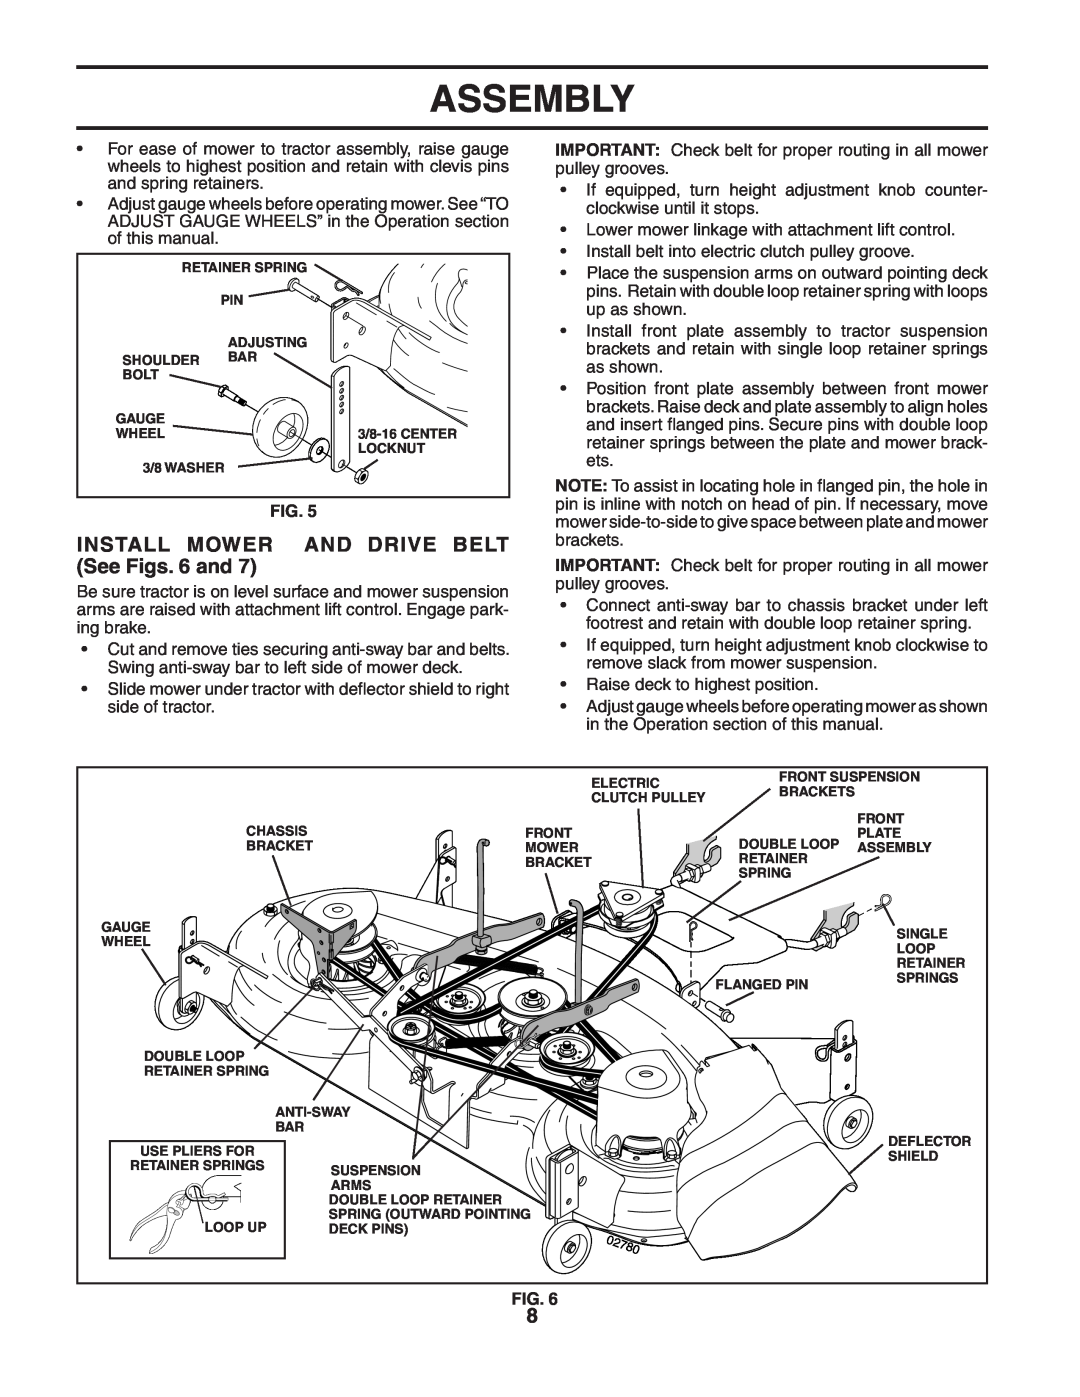 Husqvarna YTH2248 owner manual INSTALL MOWER AND DRIVE BELT See Figs. 6 and, Assembly 